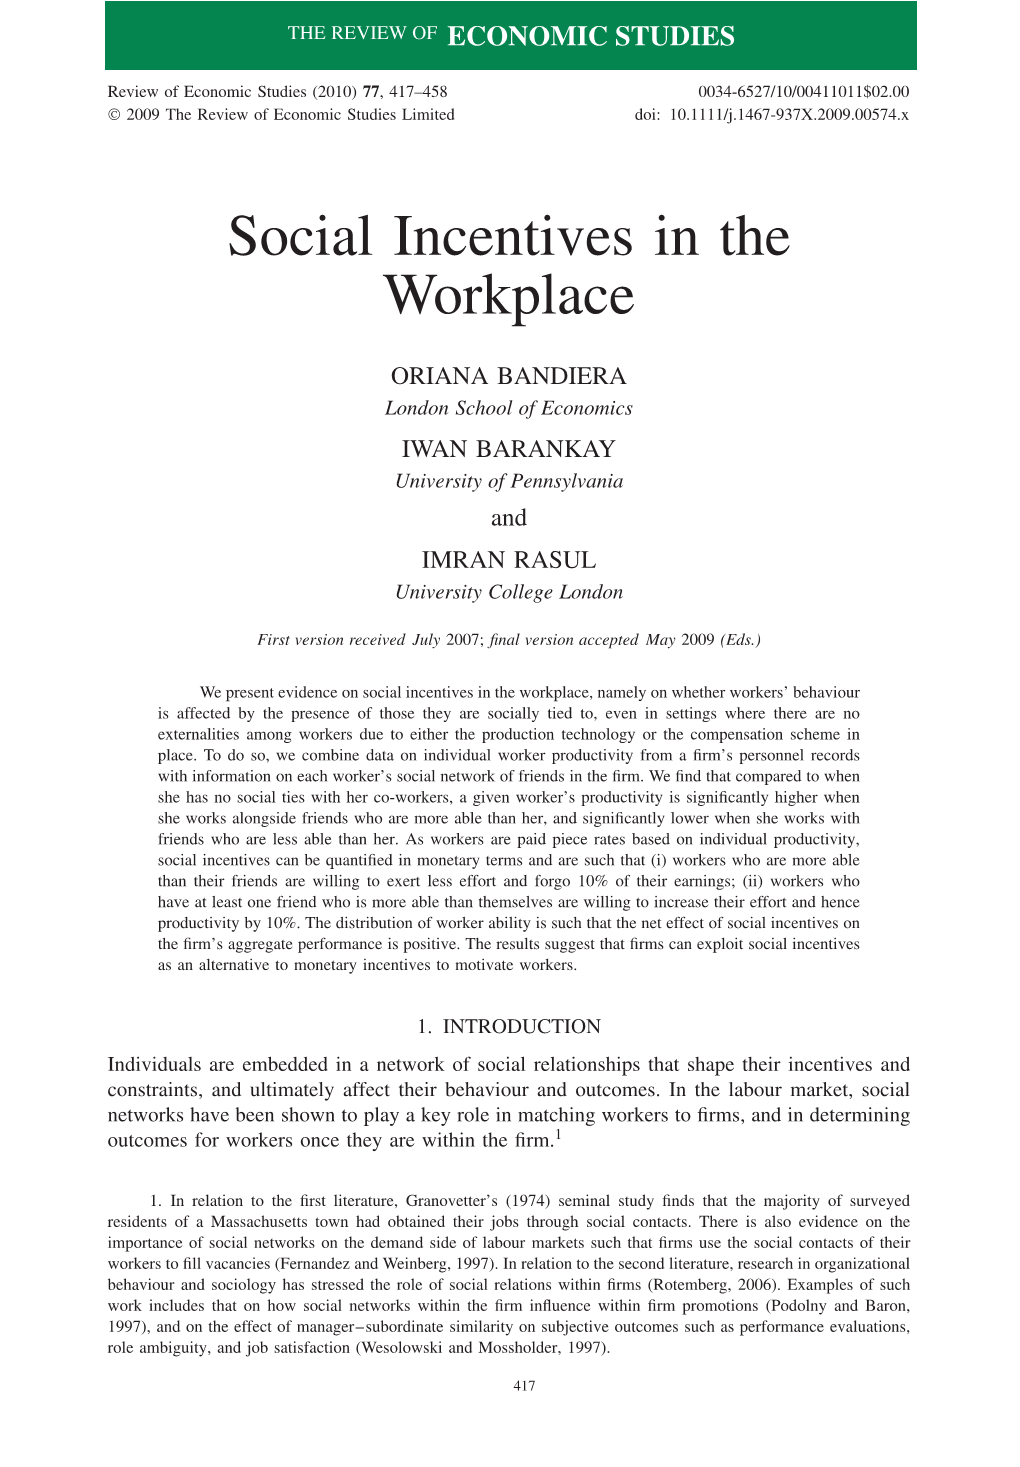 Social Incentives in the Workplace